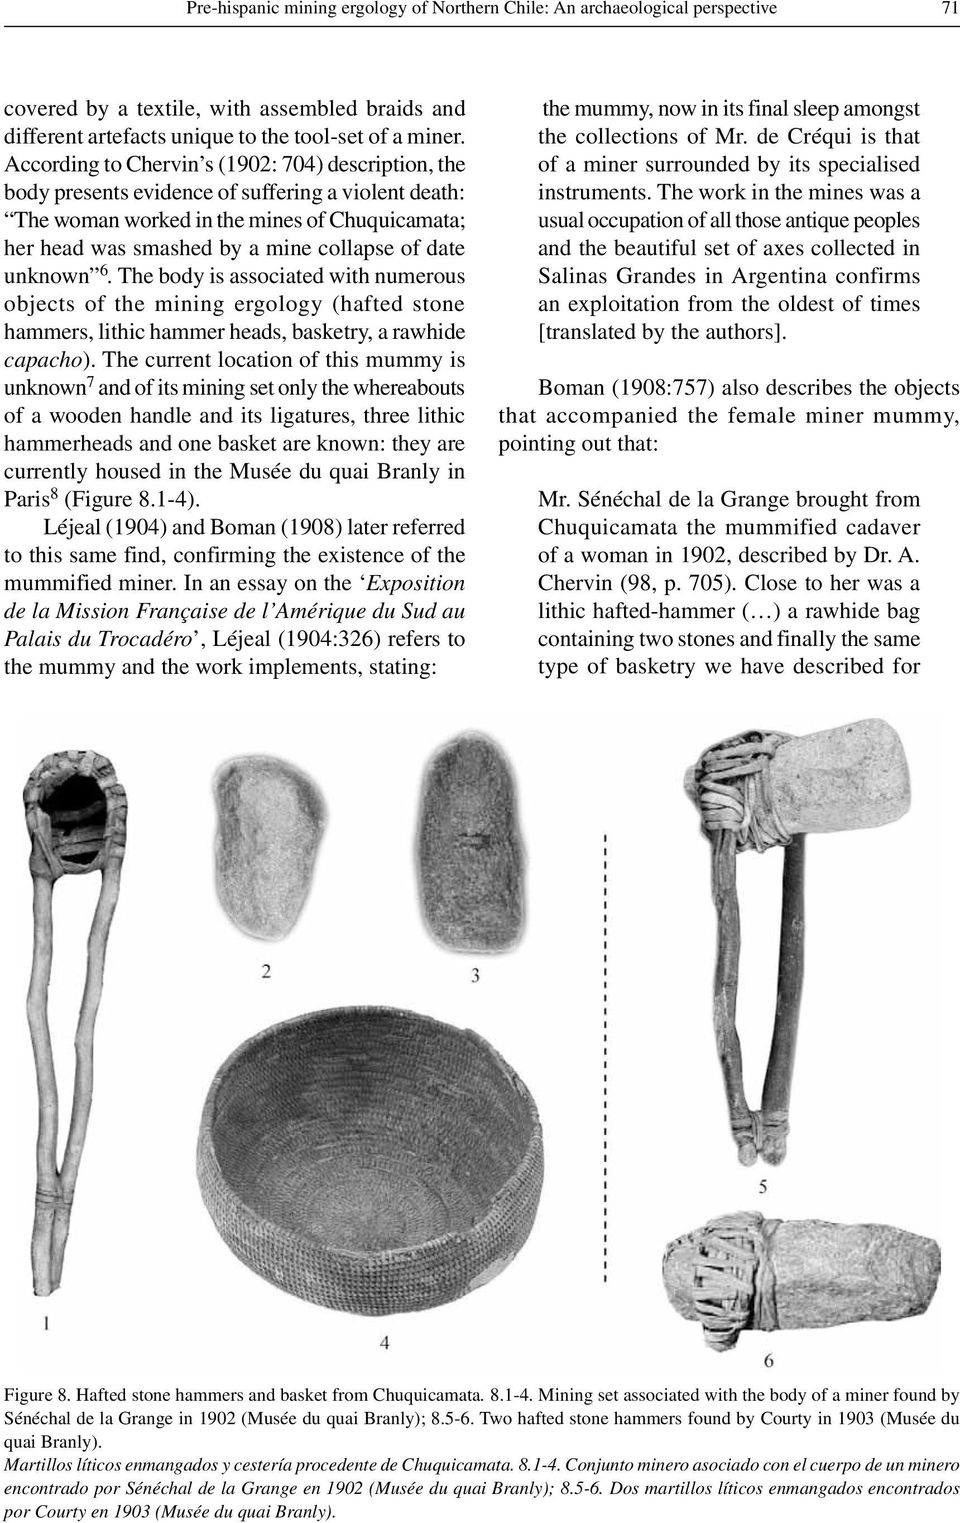 unknown 6. The body is associated with numerous objects of the mining ergology (hafted stone hammers, lithic hammer heads, basketry, a rawhide capacho).